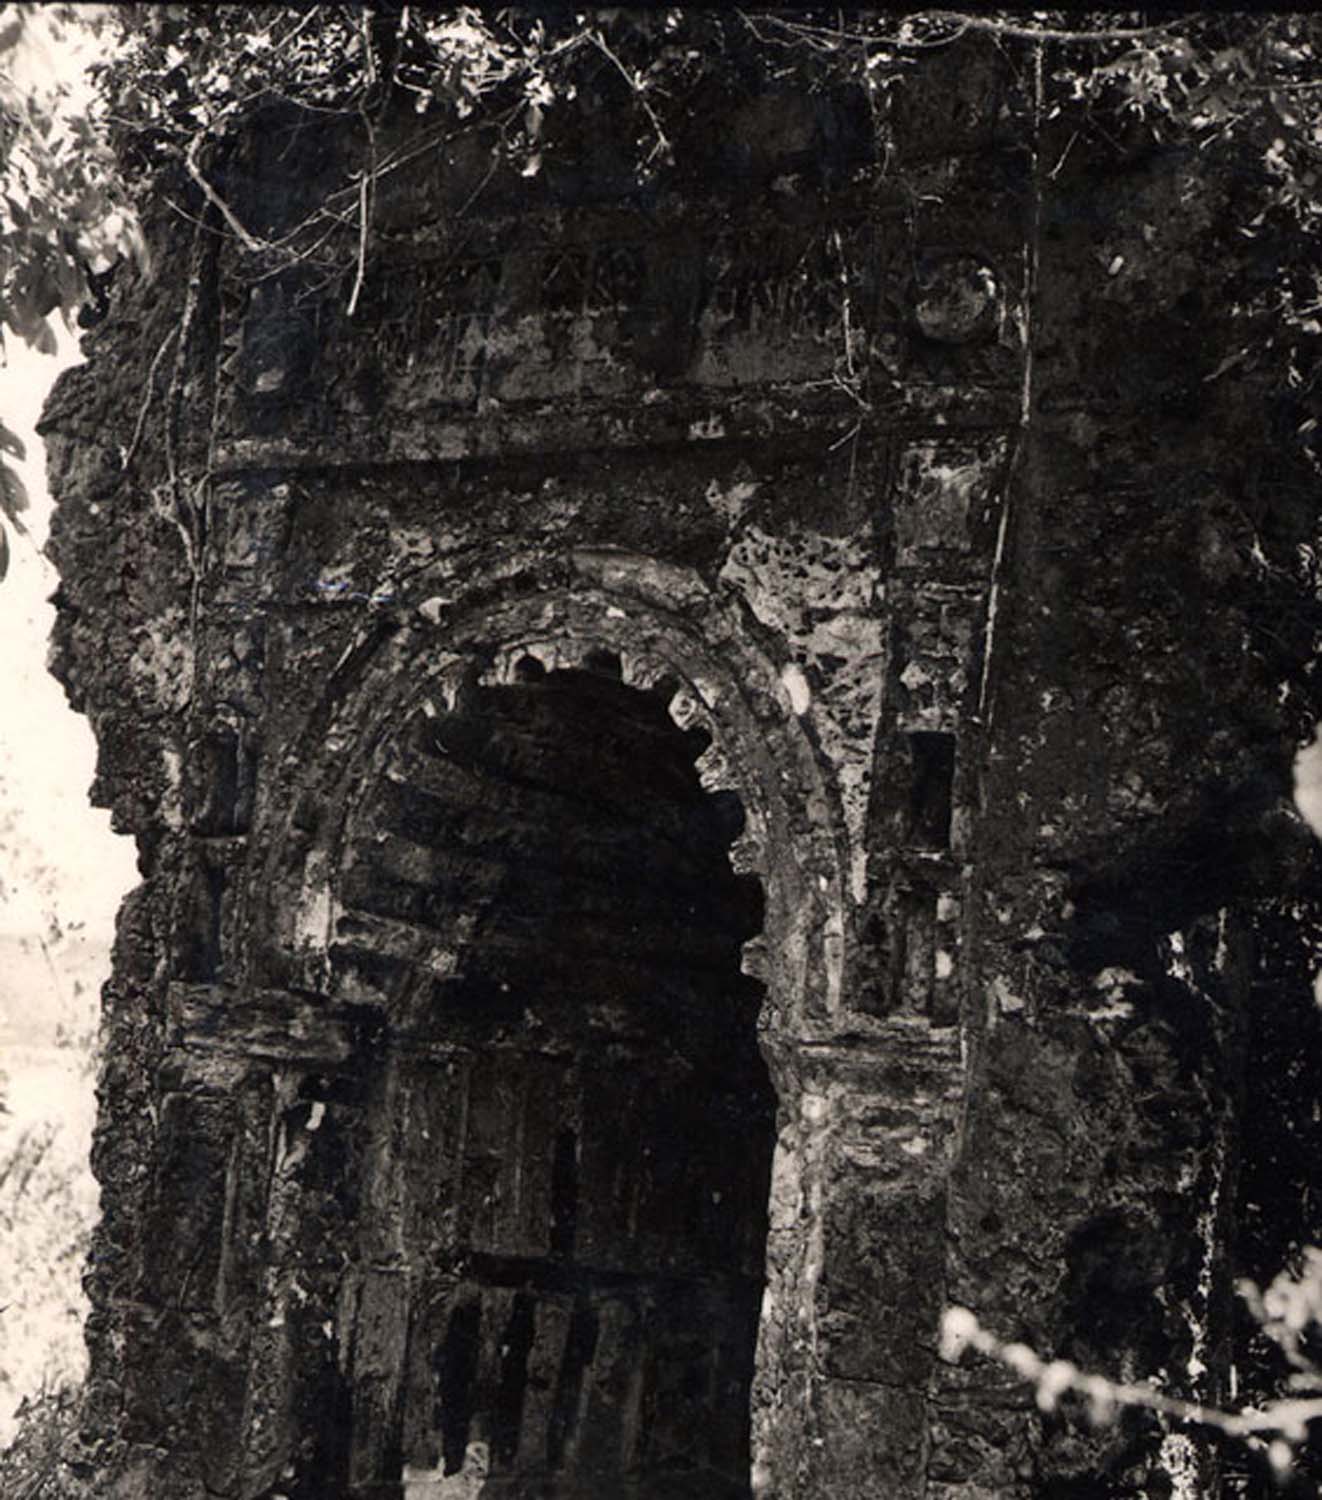 General view of mihrab and ruined wall